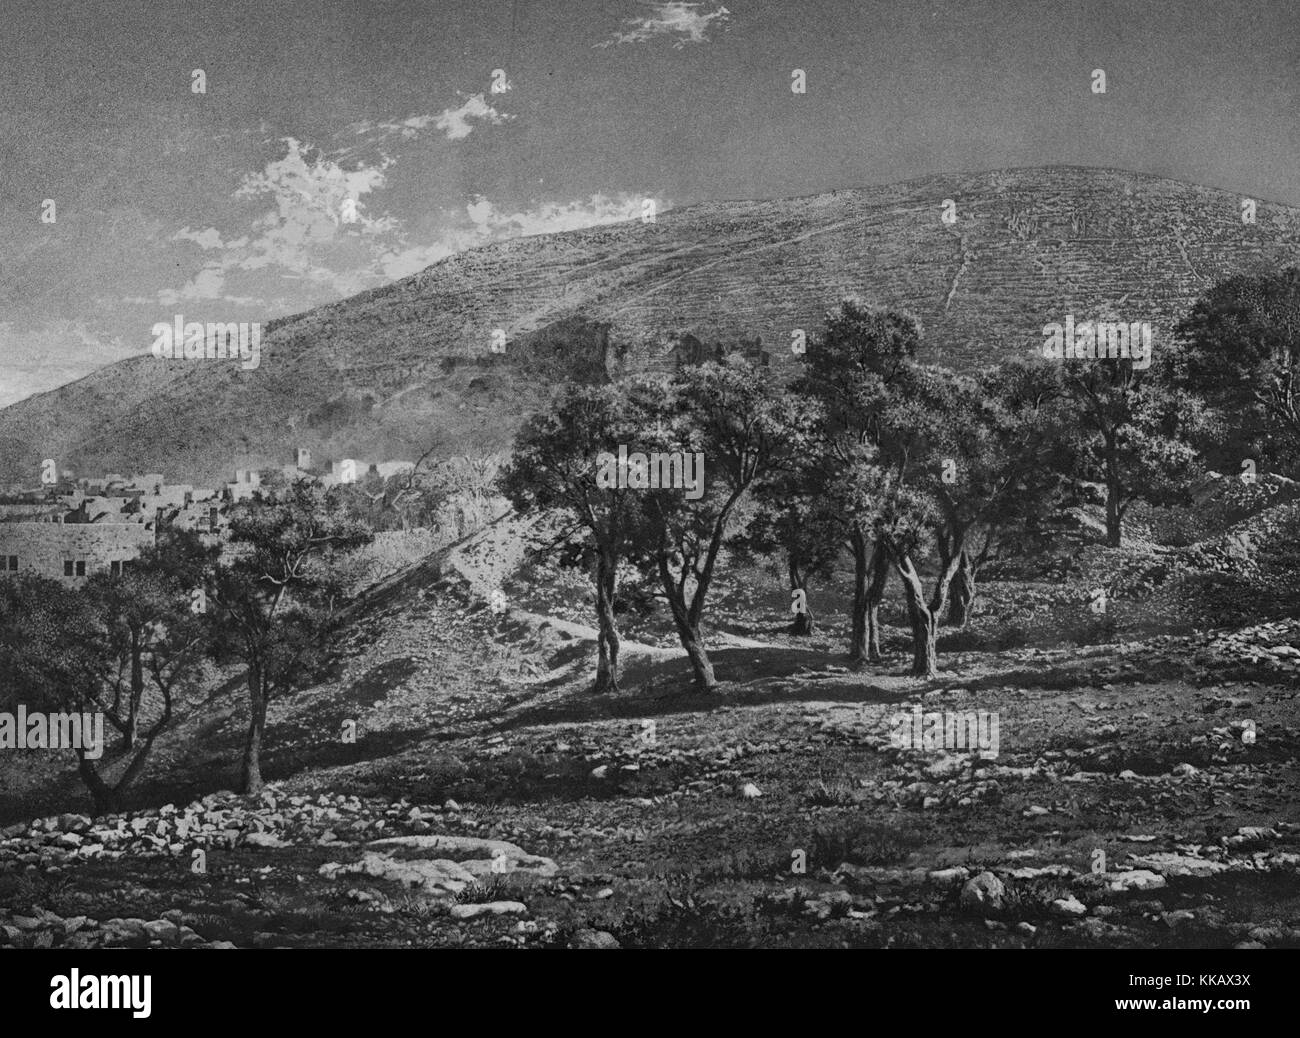 Black and white photograph with rocks and trees in the foreground, hills and ancient settlement in the background, captioned 'Naplouse, Mont Garizim', Mount Gerizim, Nablus, West Bank, Palestine, 1874. From the New York Public Library. Stock Photo